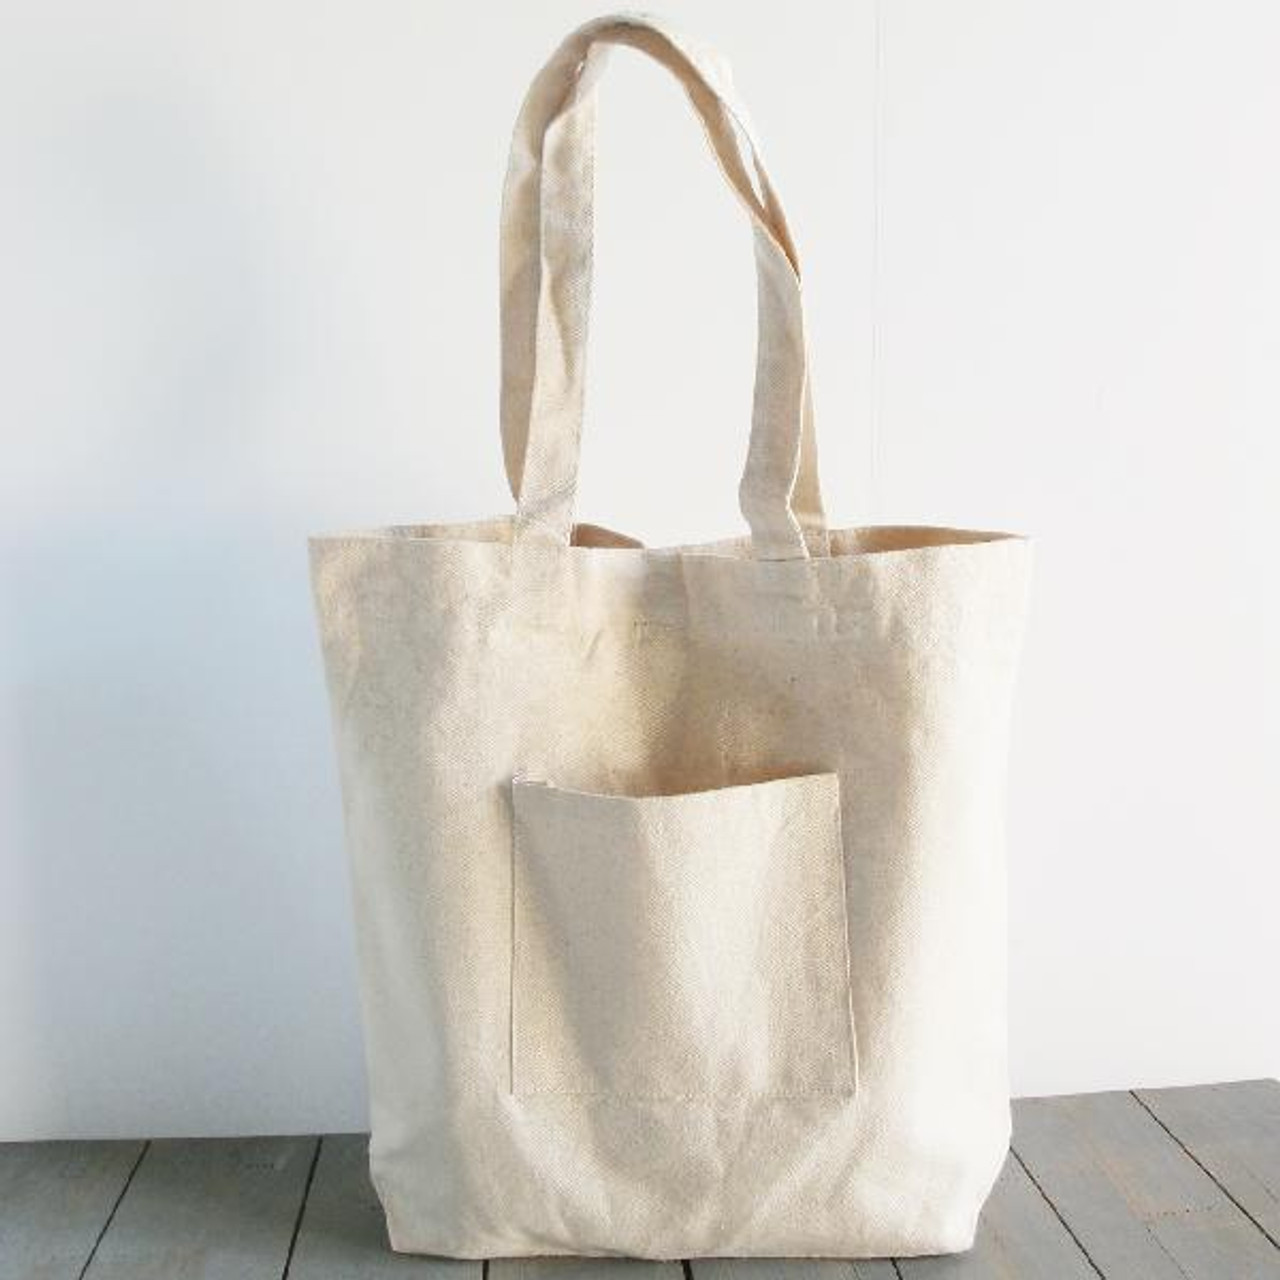 Wholesale Canvas Tote Bags, Washed Canvas Tote Bag with Side Pockets Natural 14" x 14" x 5"D, B799-71 | Packaging Decor